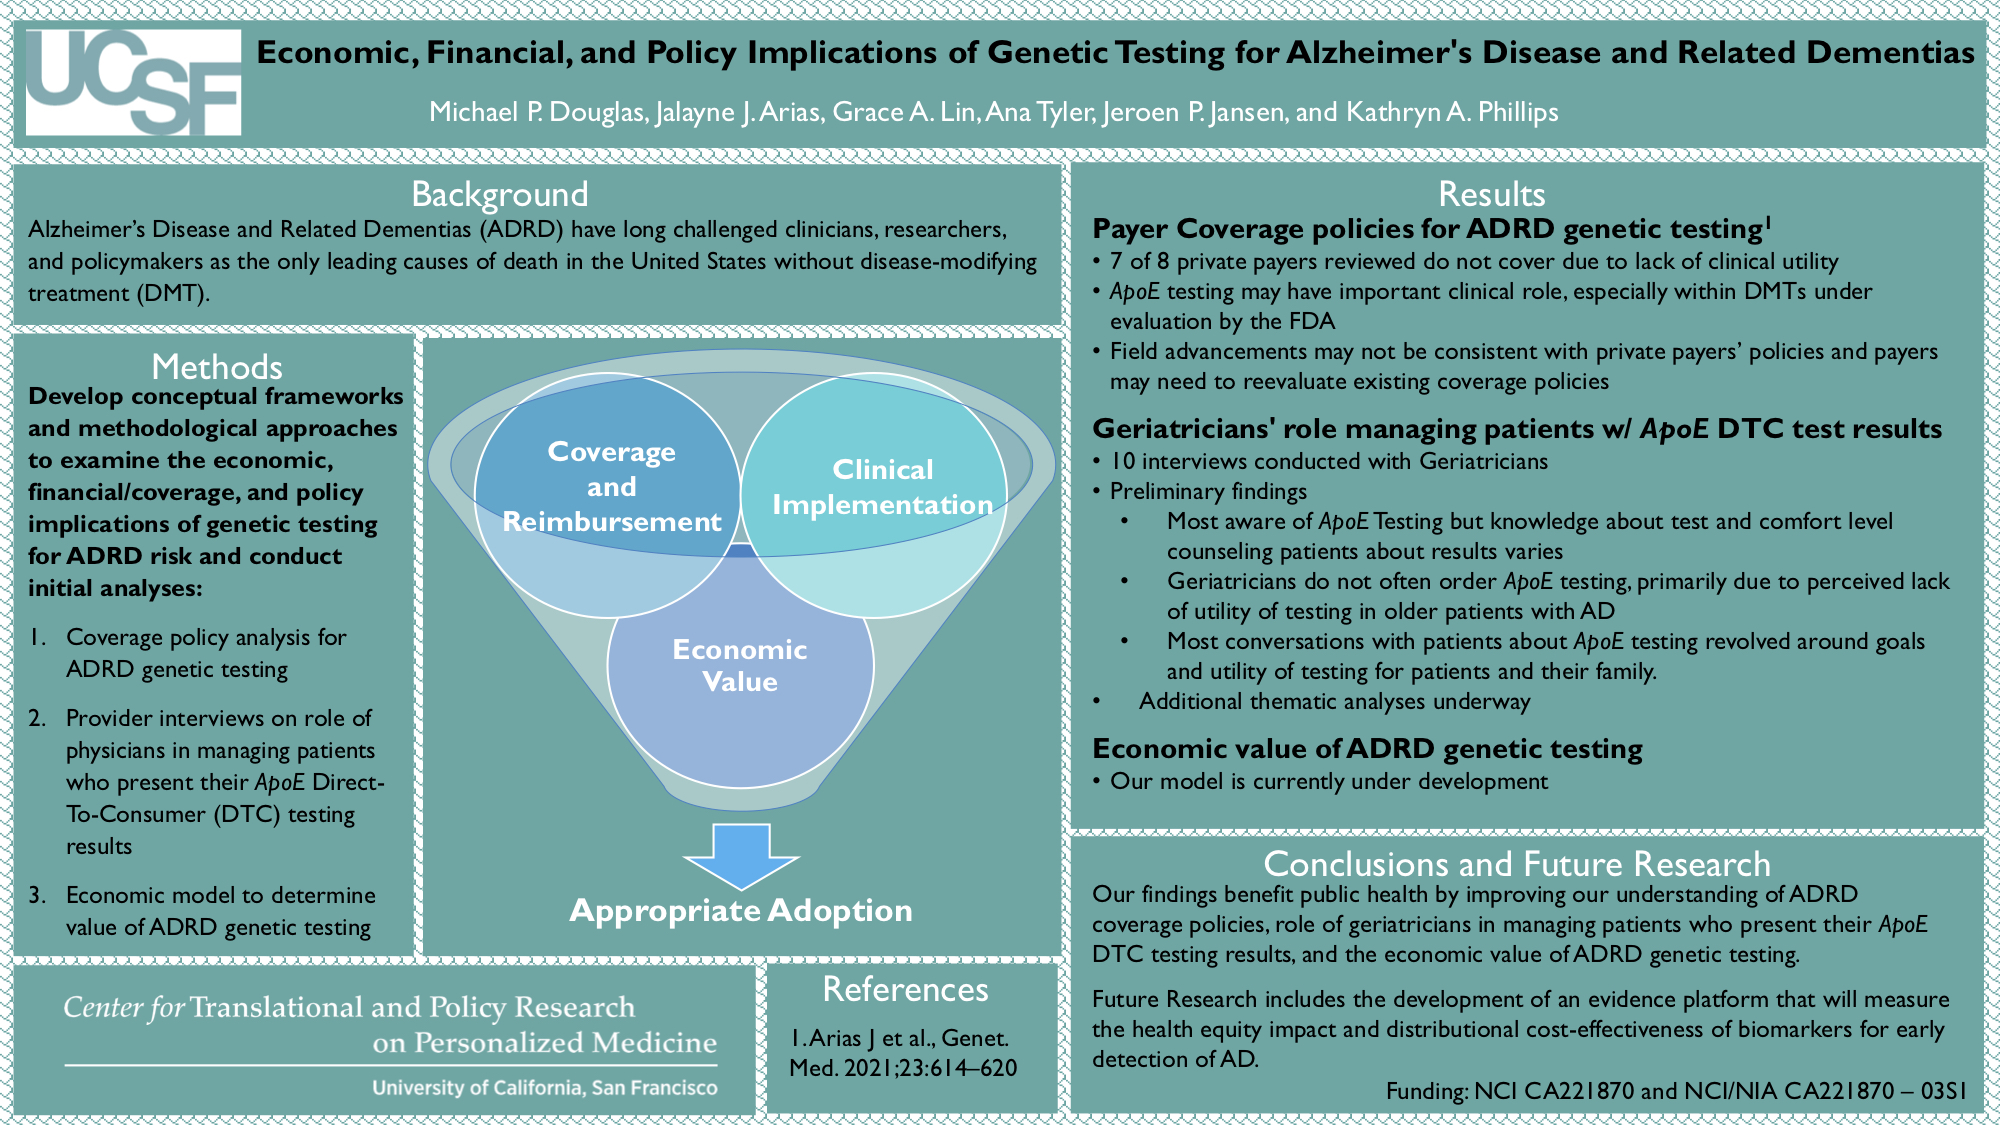 poster showing Economic, Financial, and Policy Implications of Genetic Testing for Alzheimer's Disease and Related Dementias